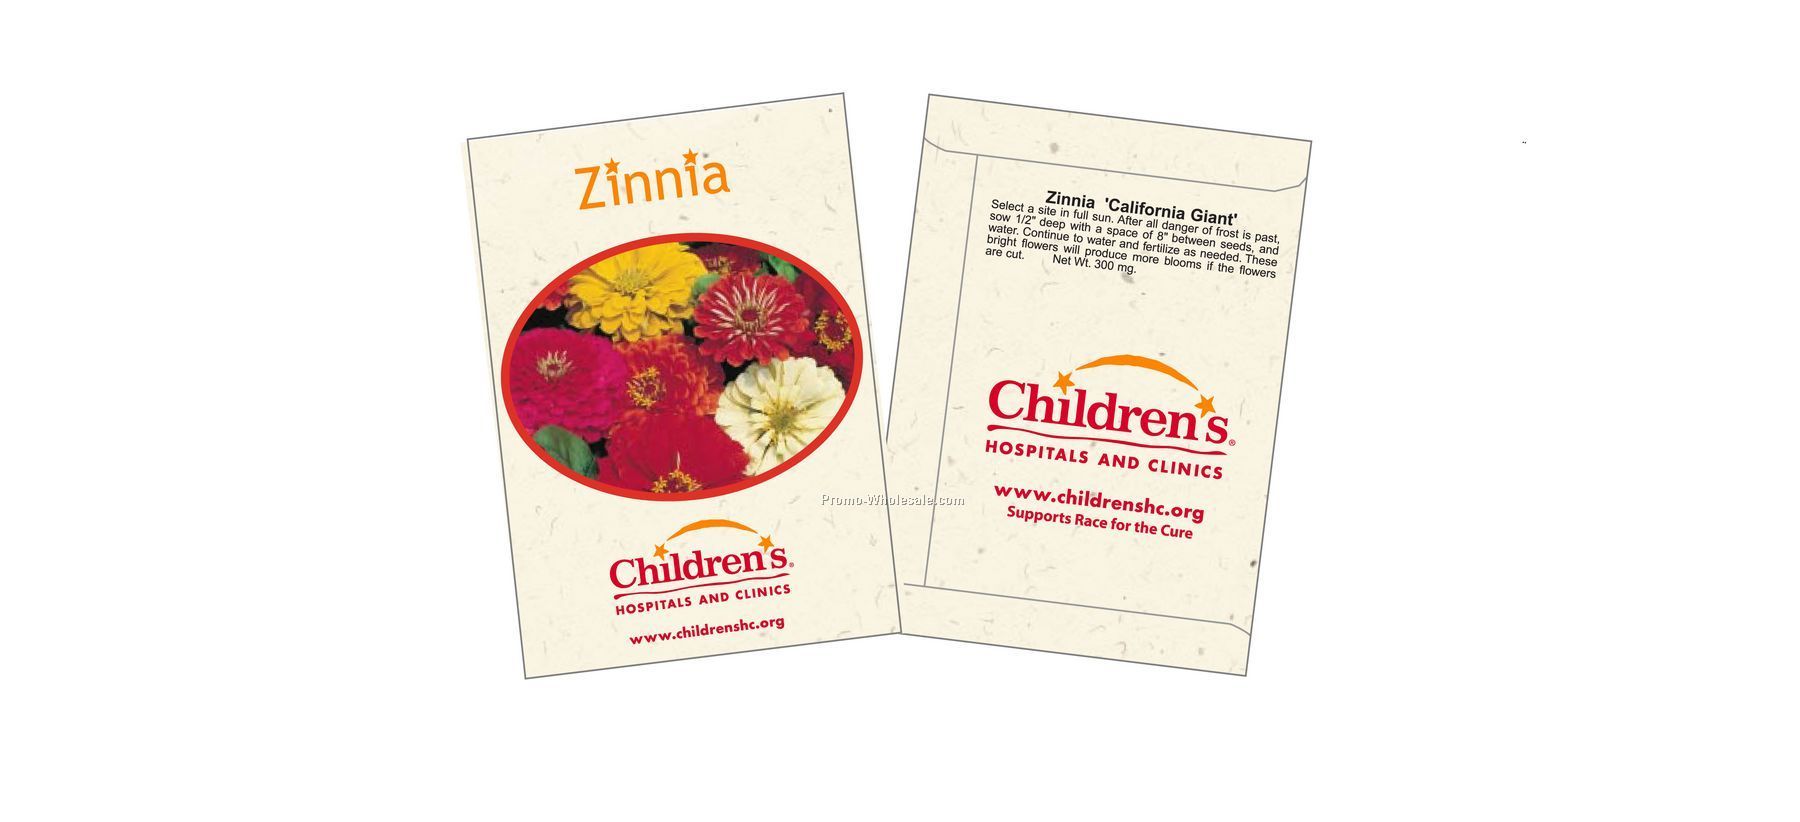 3-1/4"x4-1/2" Zinnia - California Giant - Flower Seed Packet (2 Color)